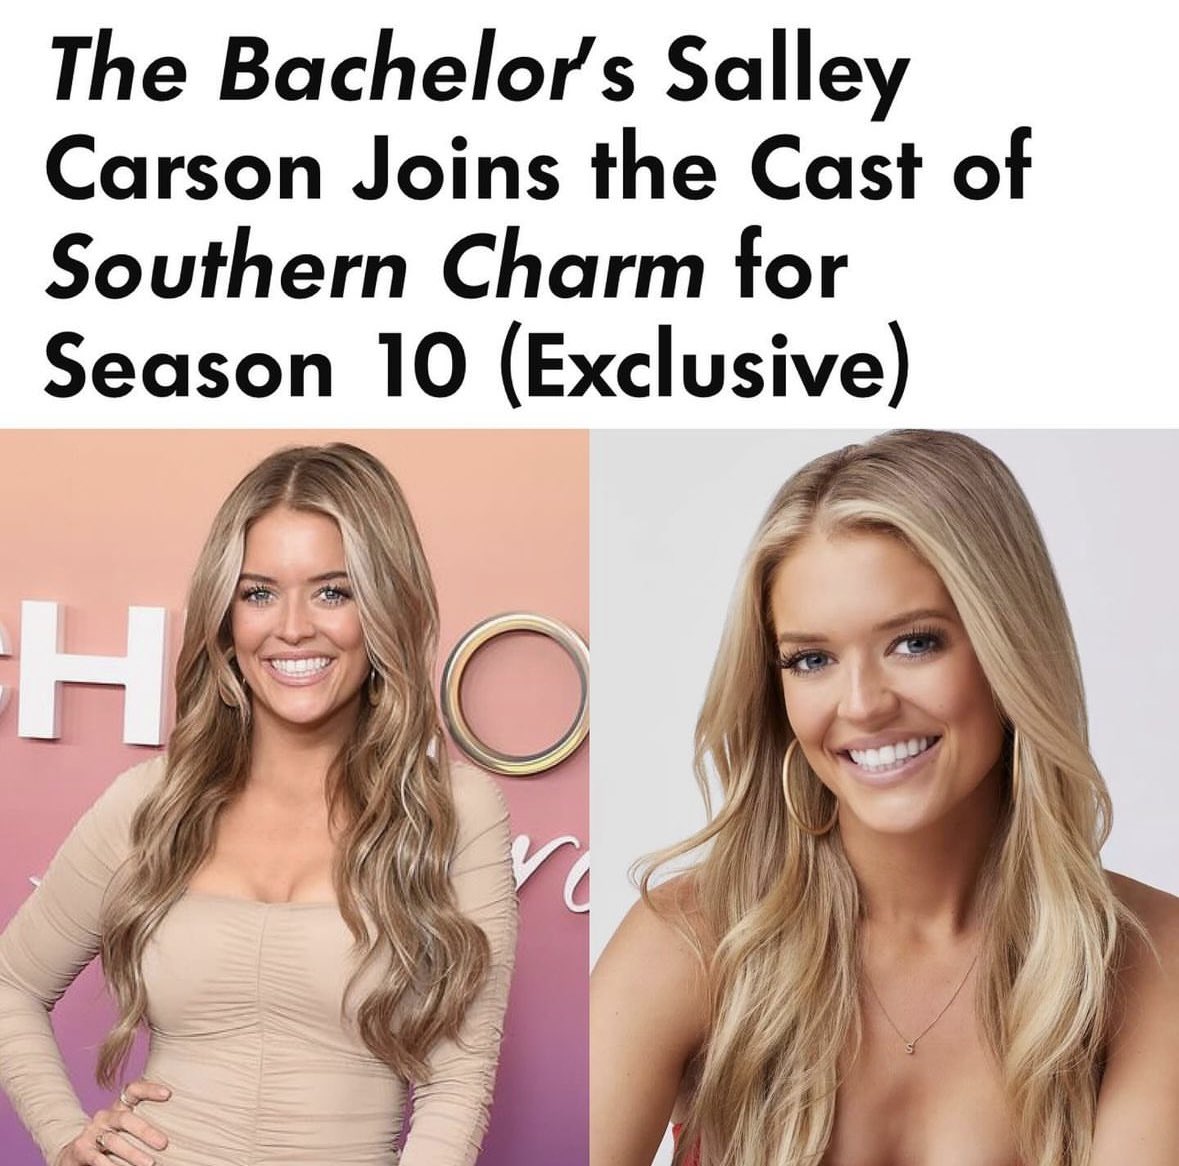 Salley got screen time for bailing on both Clayton’s #TheBachelor season and #BachelorInParadise, correct? She’s already been in the #SouthernHospitality drama with Joe Bradley. Now she’s surely coming for Shep & Whitney #SouthernCharm